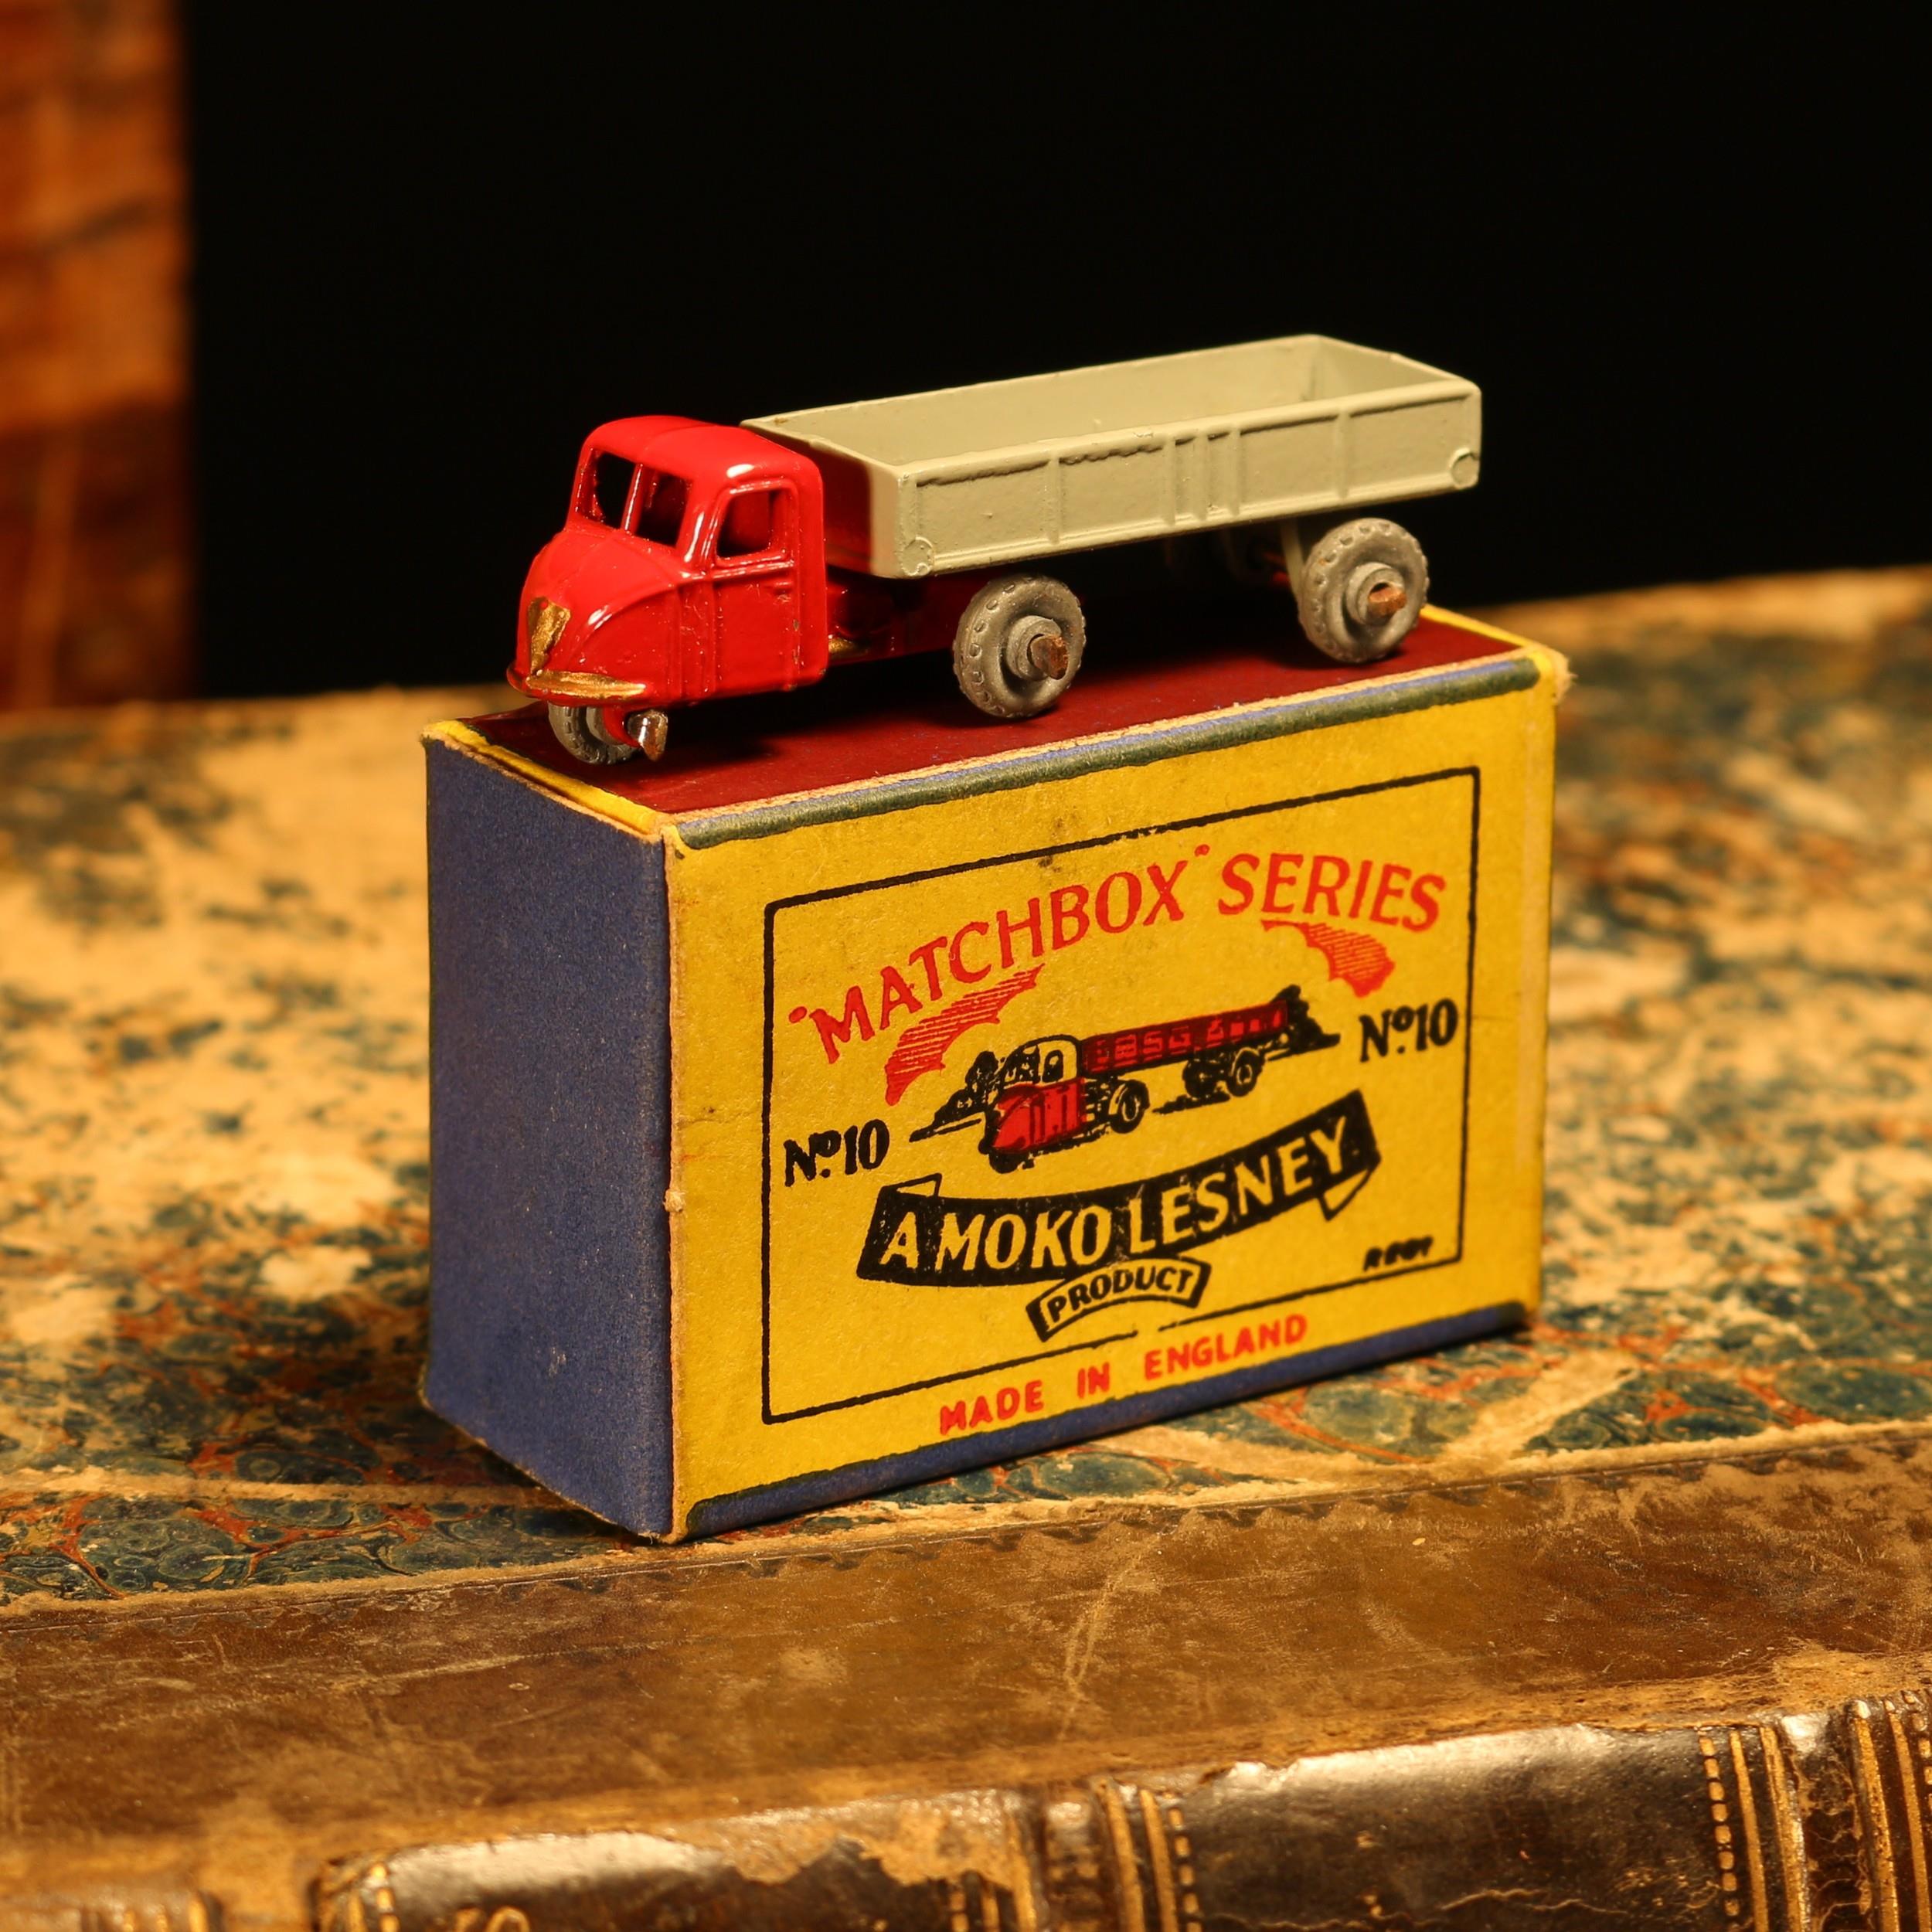 Matchbox '1-75' series diecast model 10a Scammell mechanical Horse, red cab with gold trim, grey